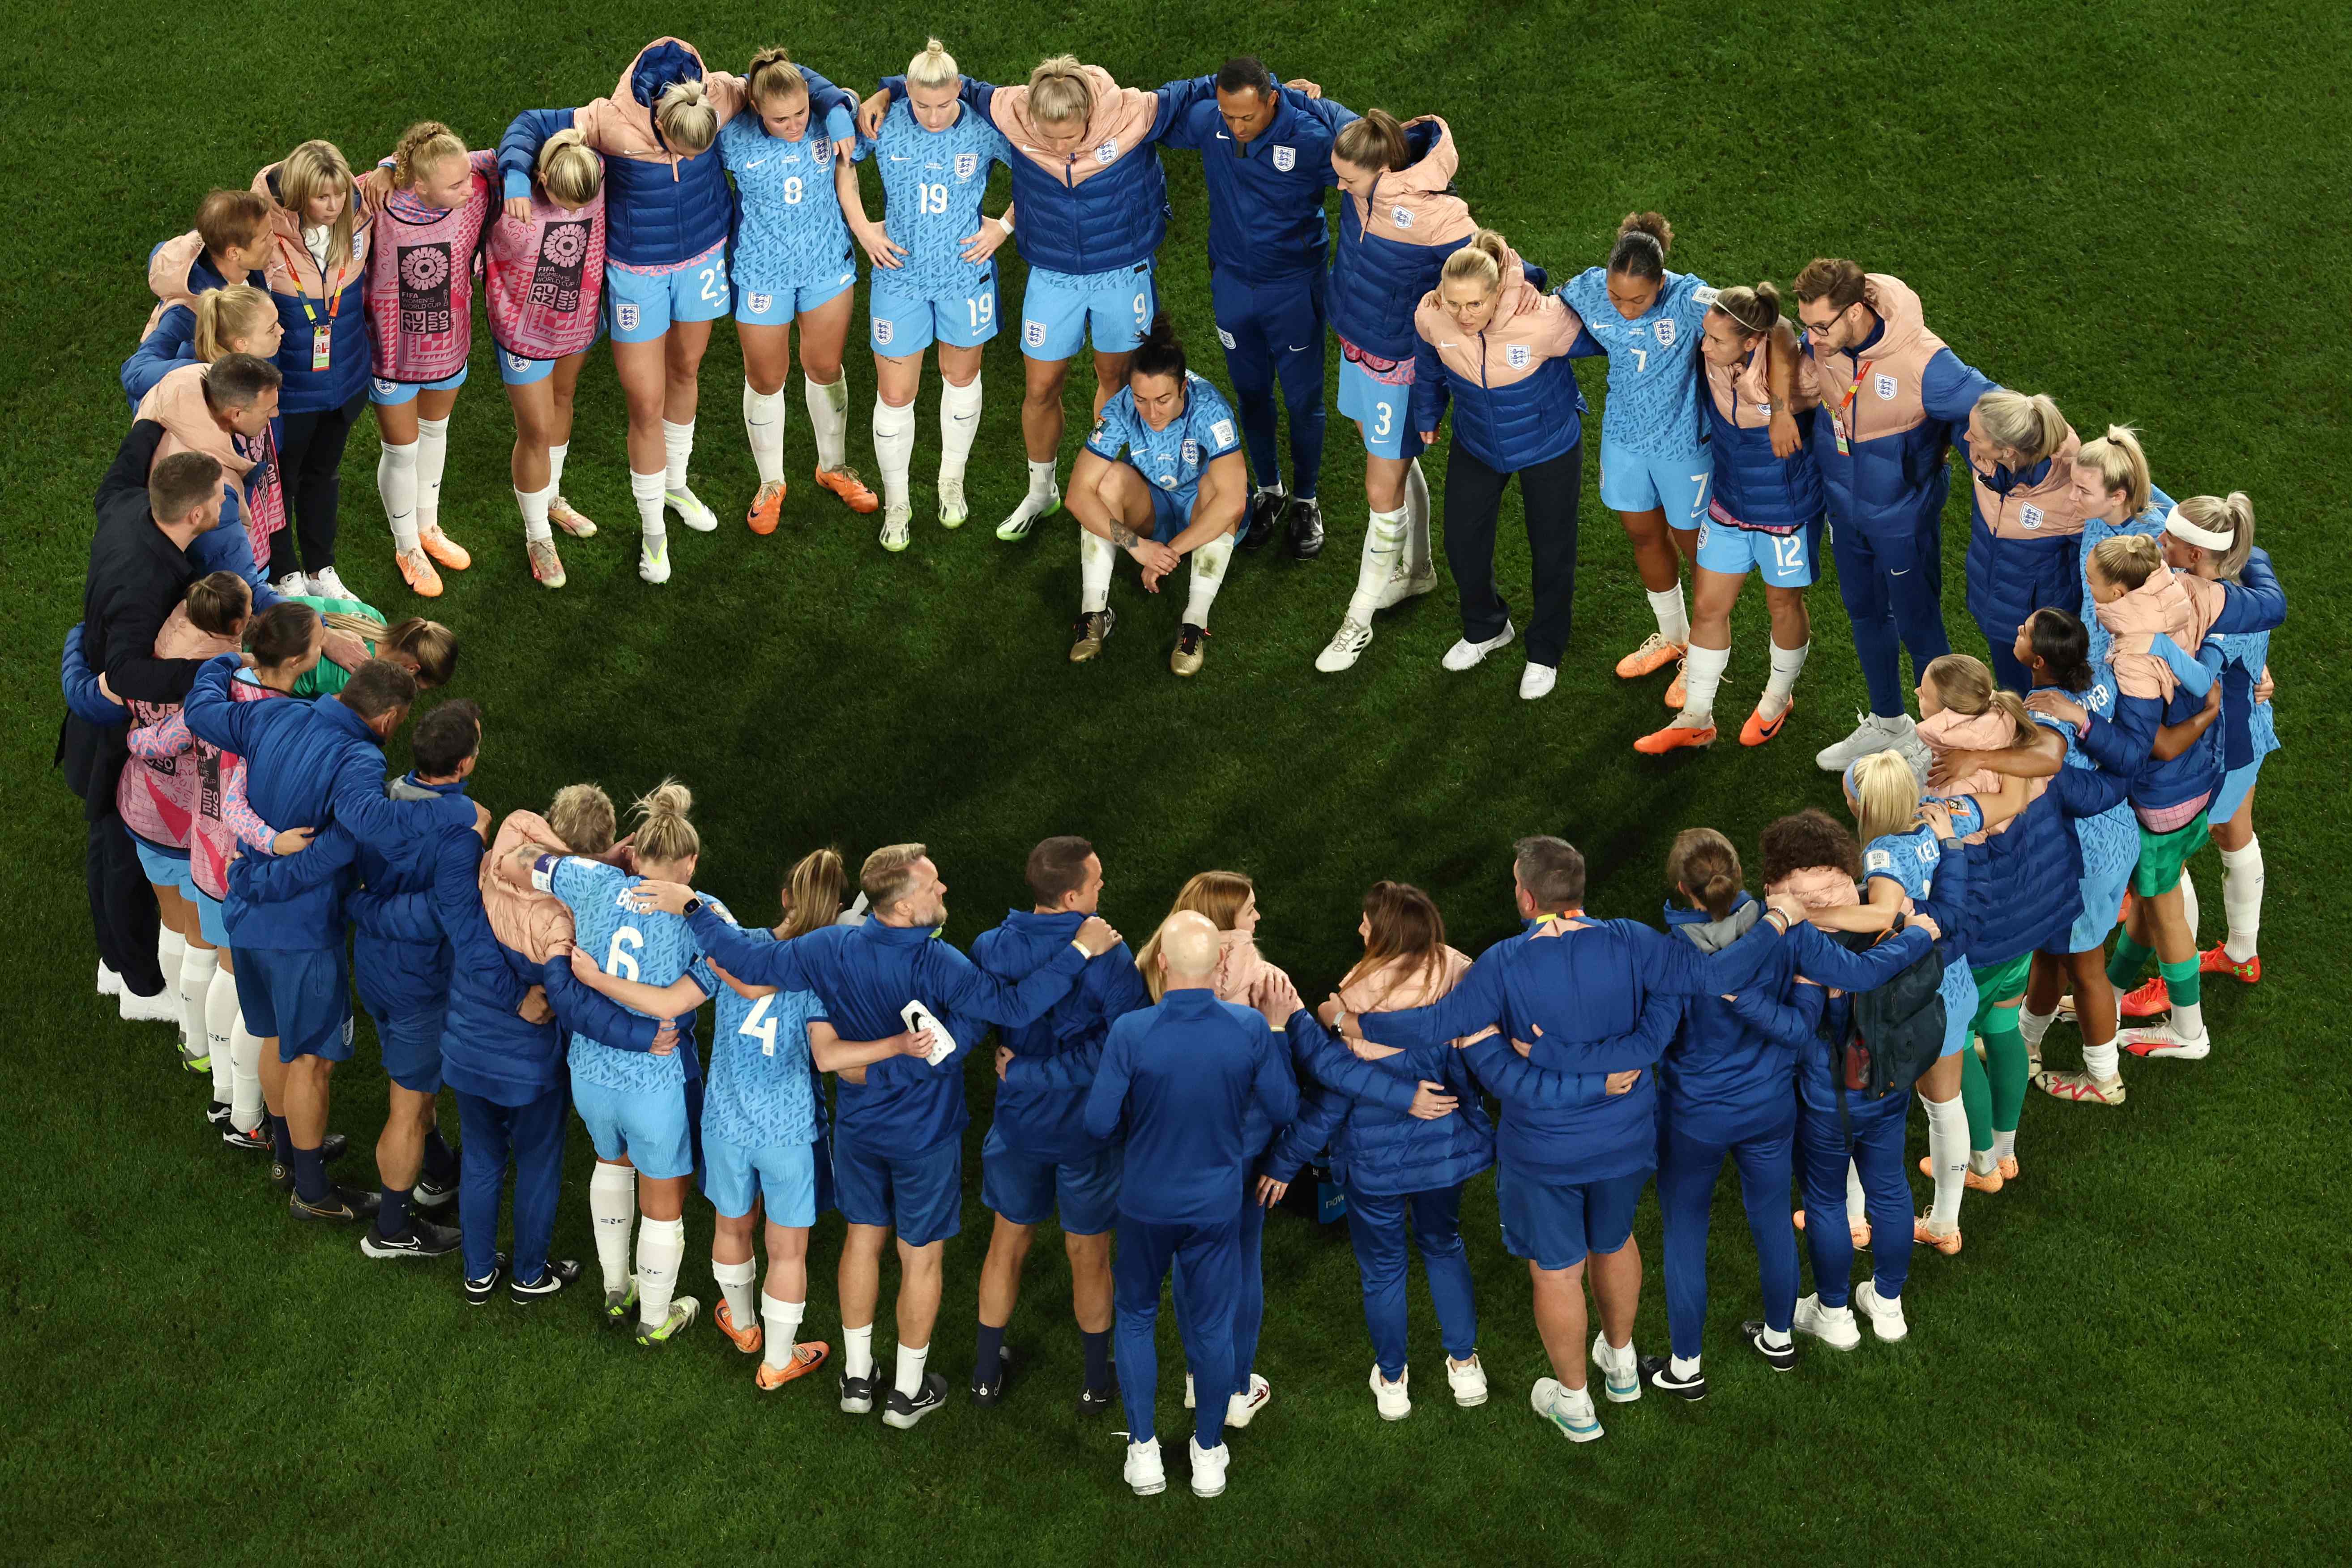 England’s players were defeated by Spain in the Women’s World Cup final in Sydney